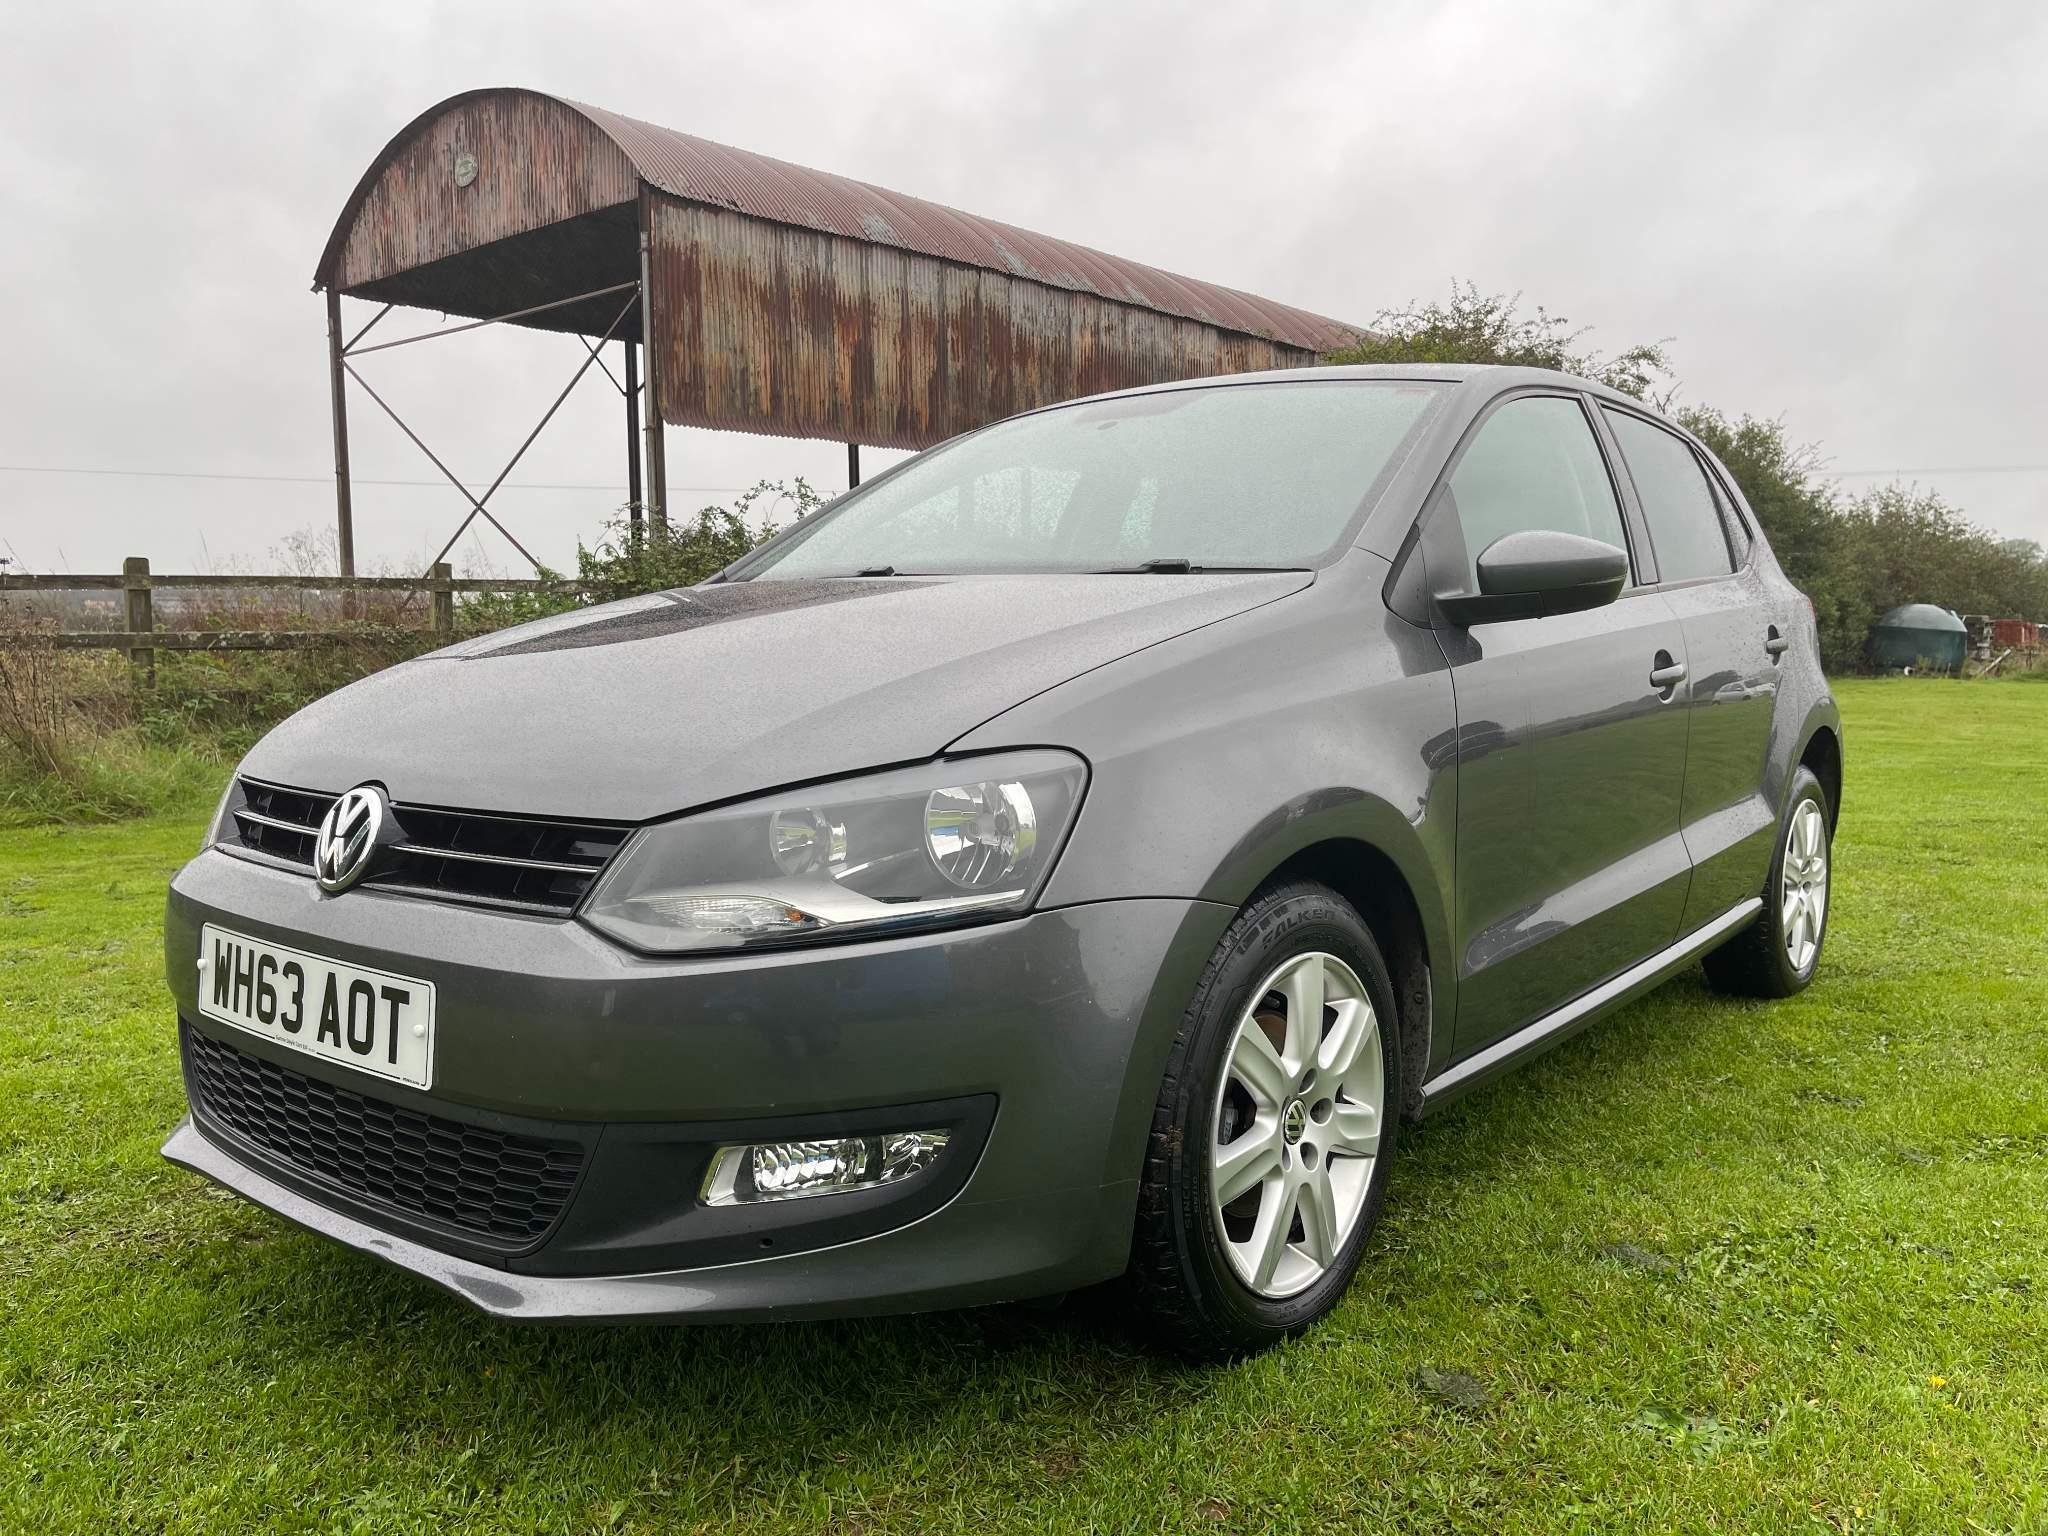 Used Volkswagen Polo 1.2 Match Edition Euro 5 5dr 2014 5dr Manual (WH63AOT)  | Ganine Doyle Cars